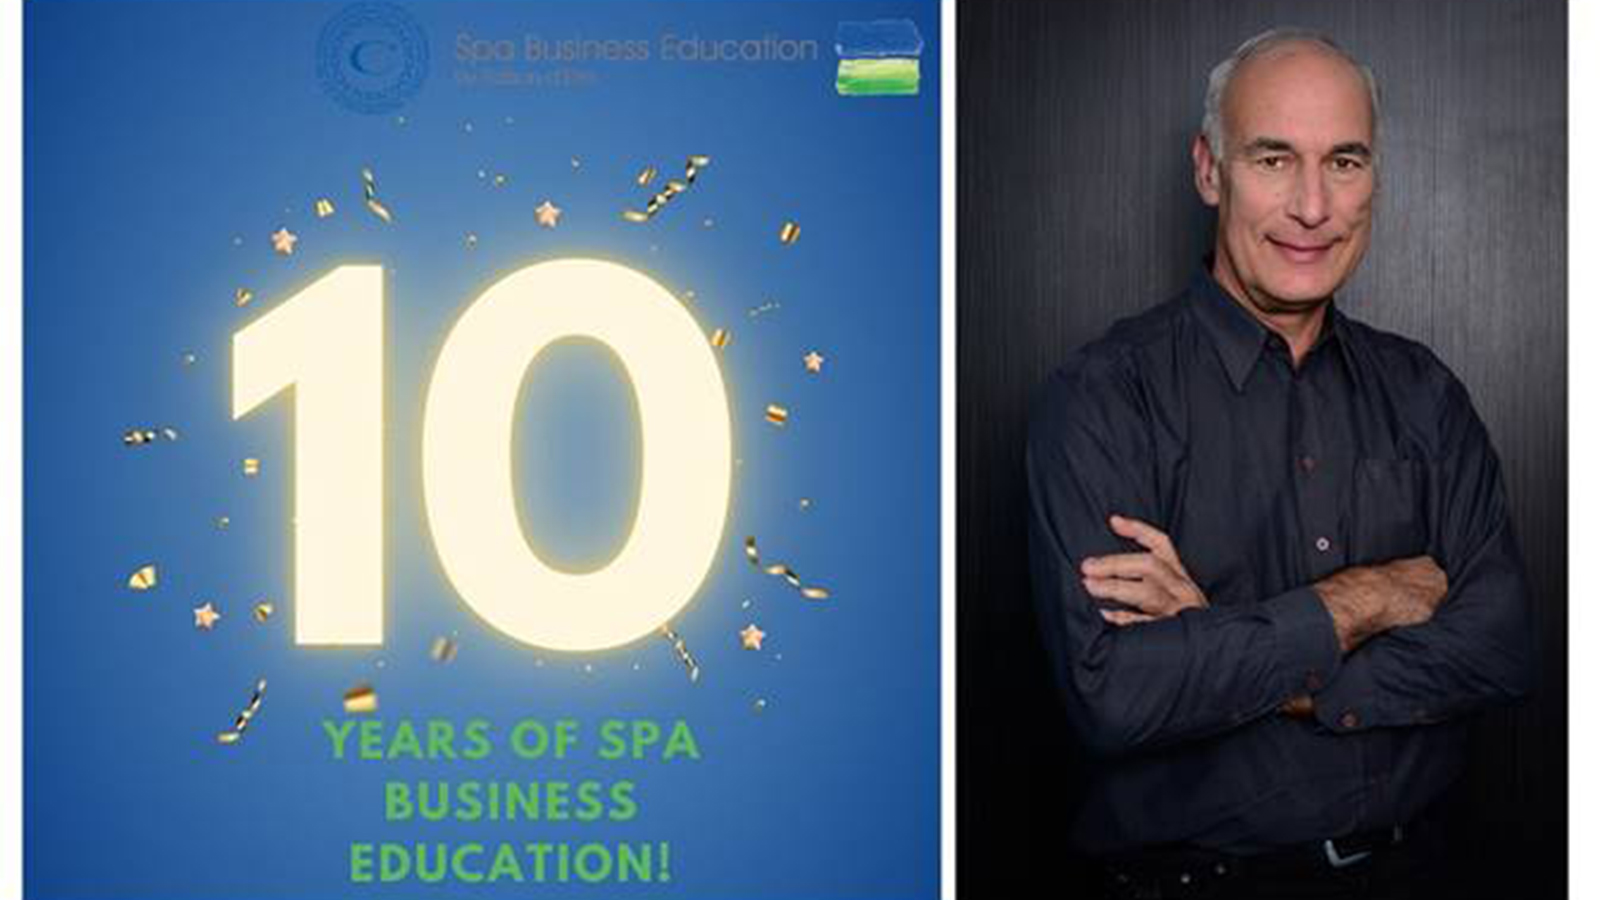 Spa Business Education